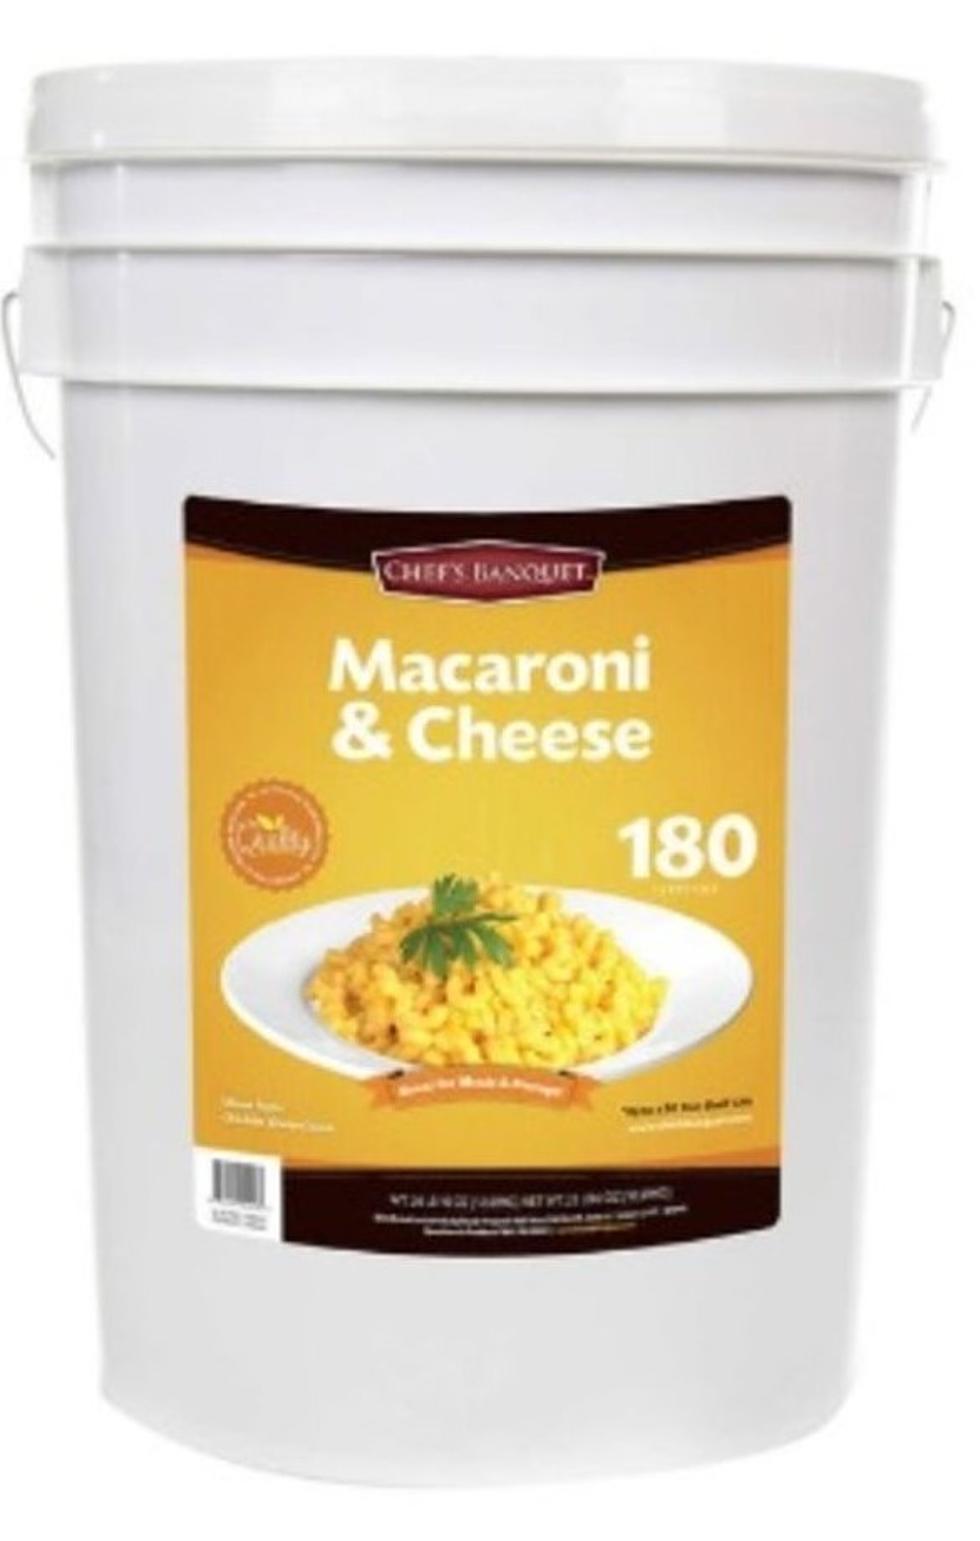 Survive The Apocalypse With A 27 Pound Bucket Of Mac & Cheese